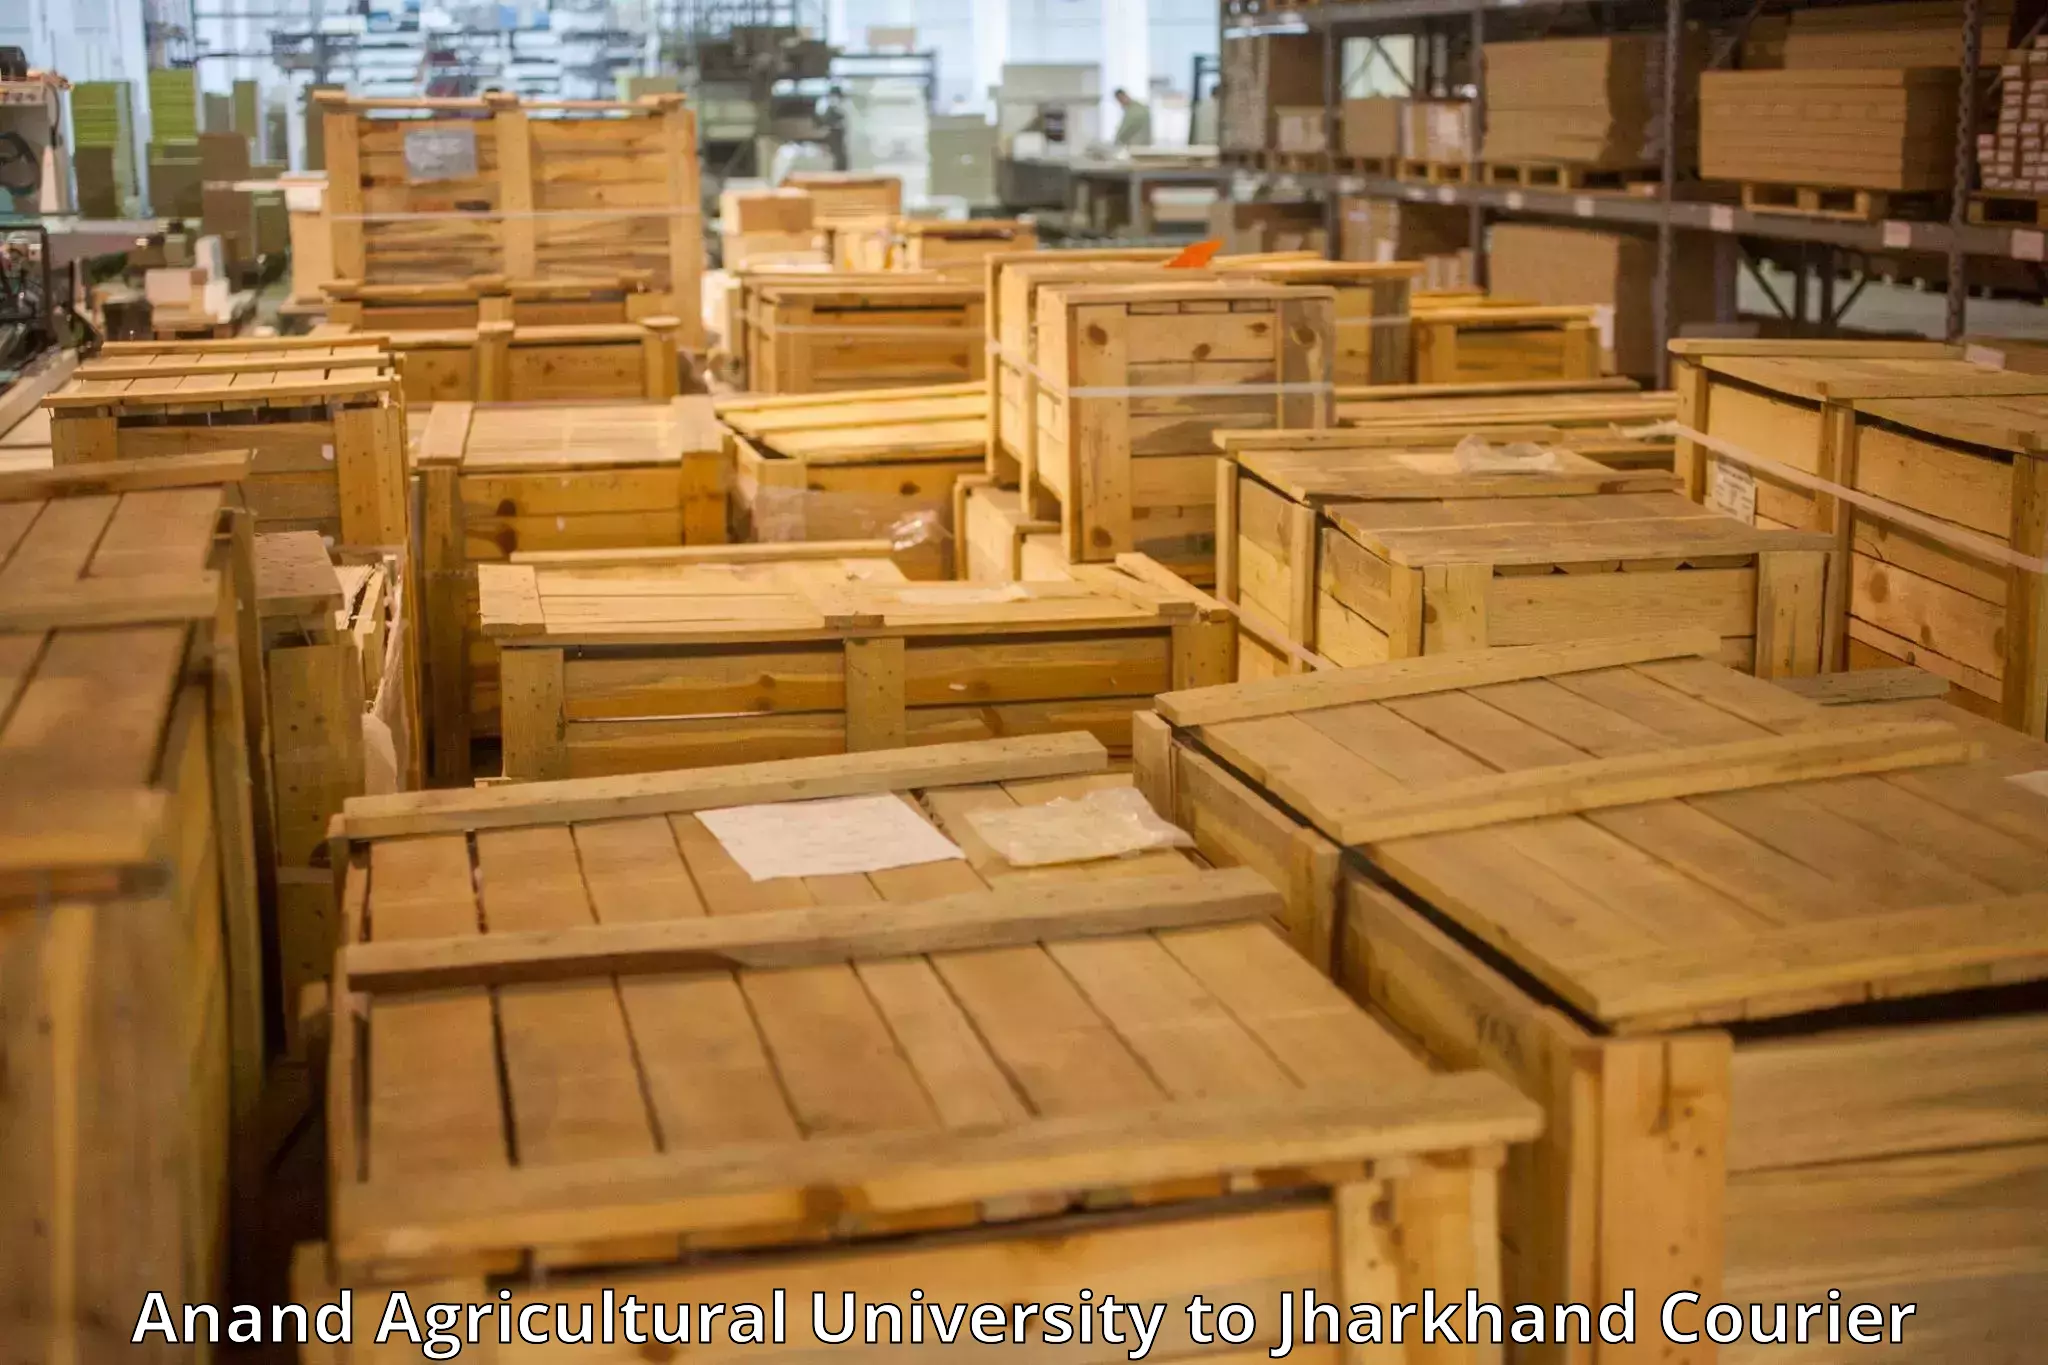 Luggage shipment logistics Anand Agricultural University to Jharkhand